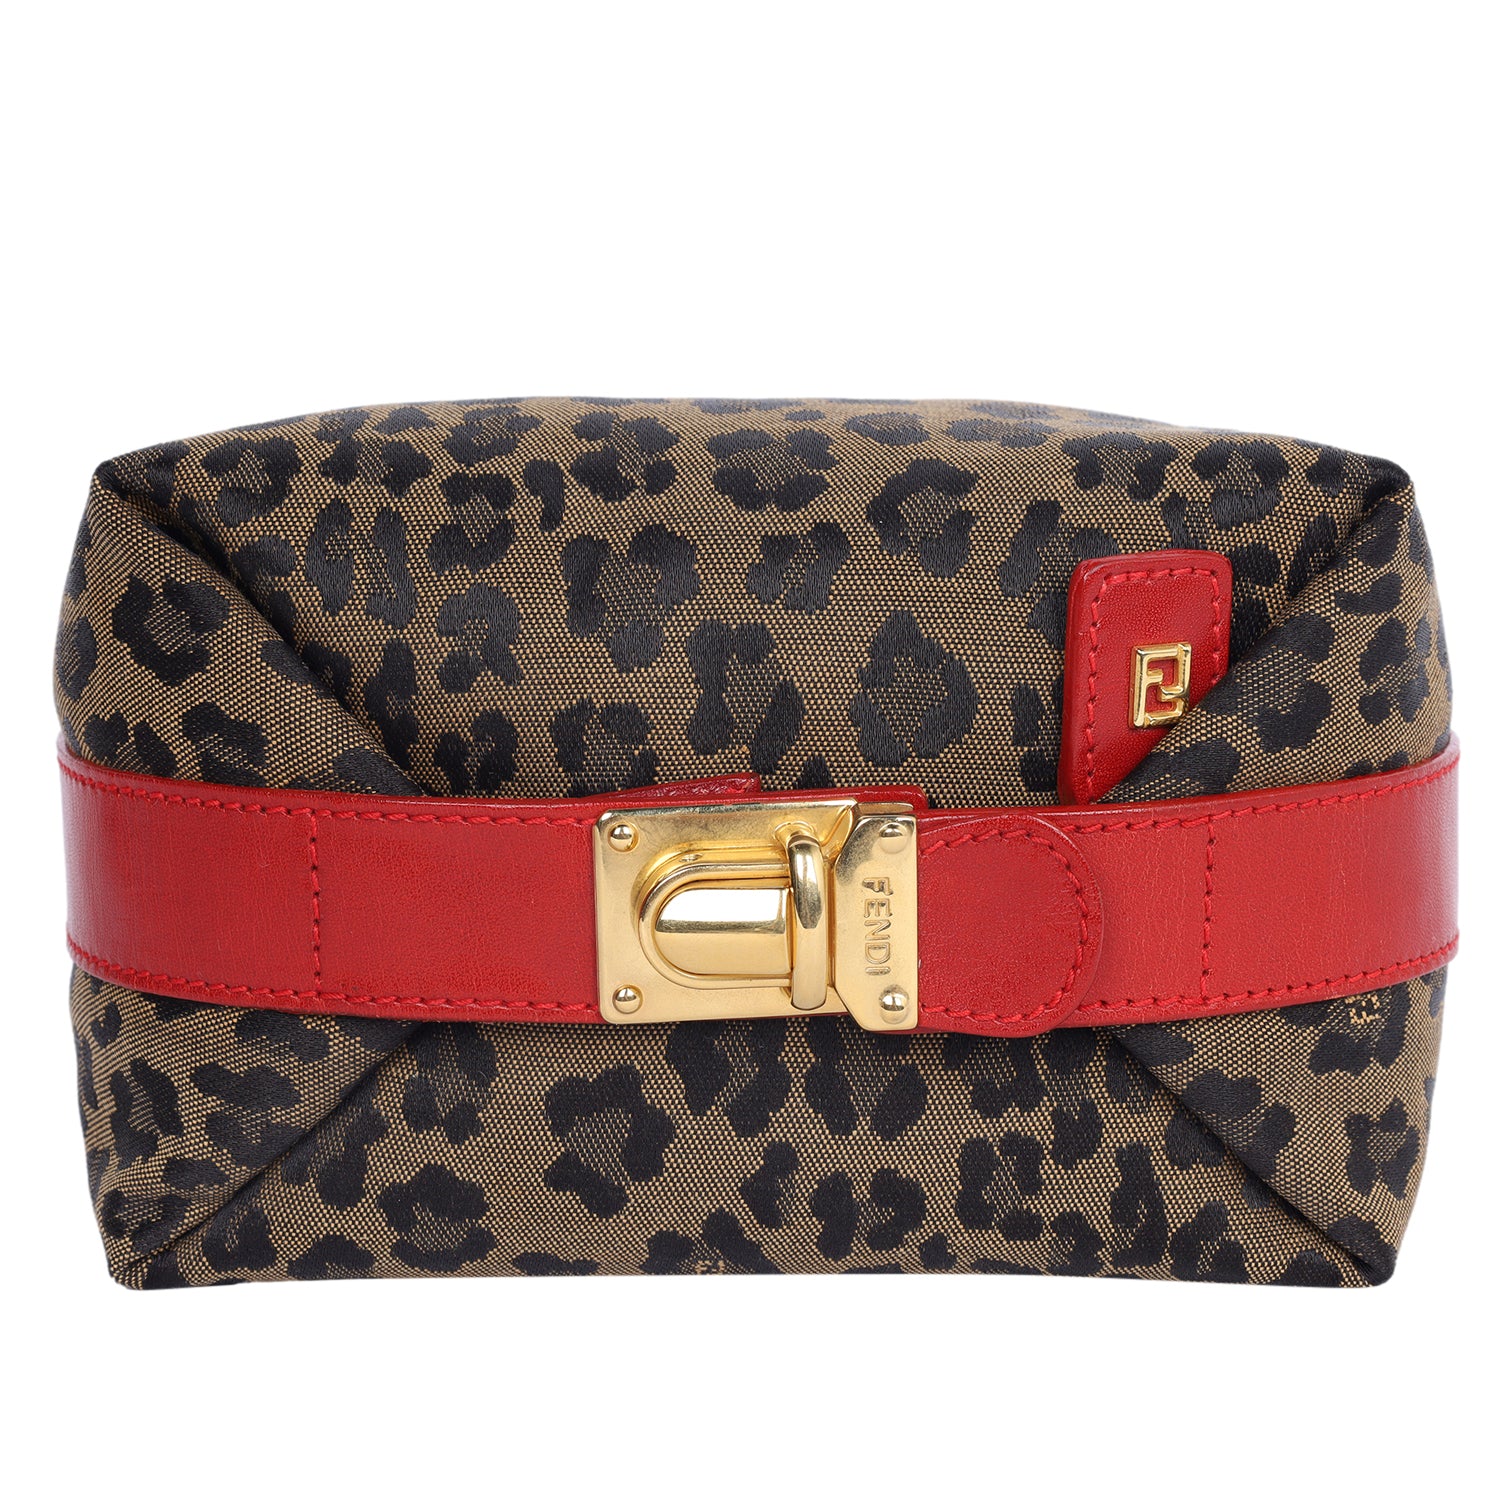 Leopard Cosmetic Bag (Authentic Pre-Owned) – The Lady Bag